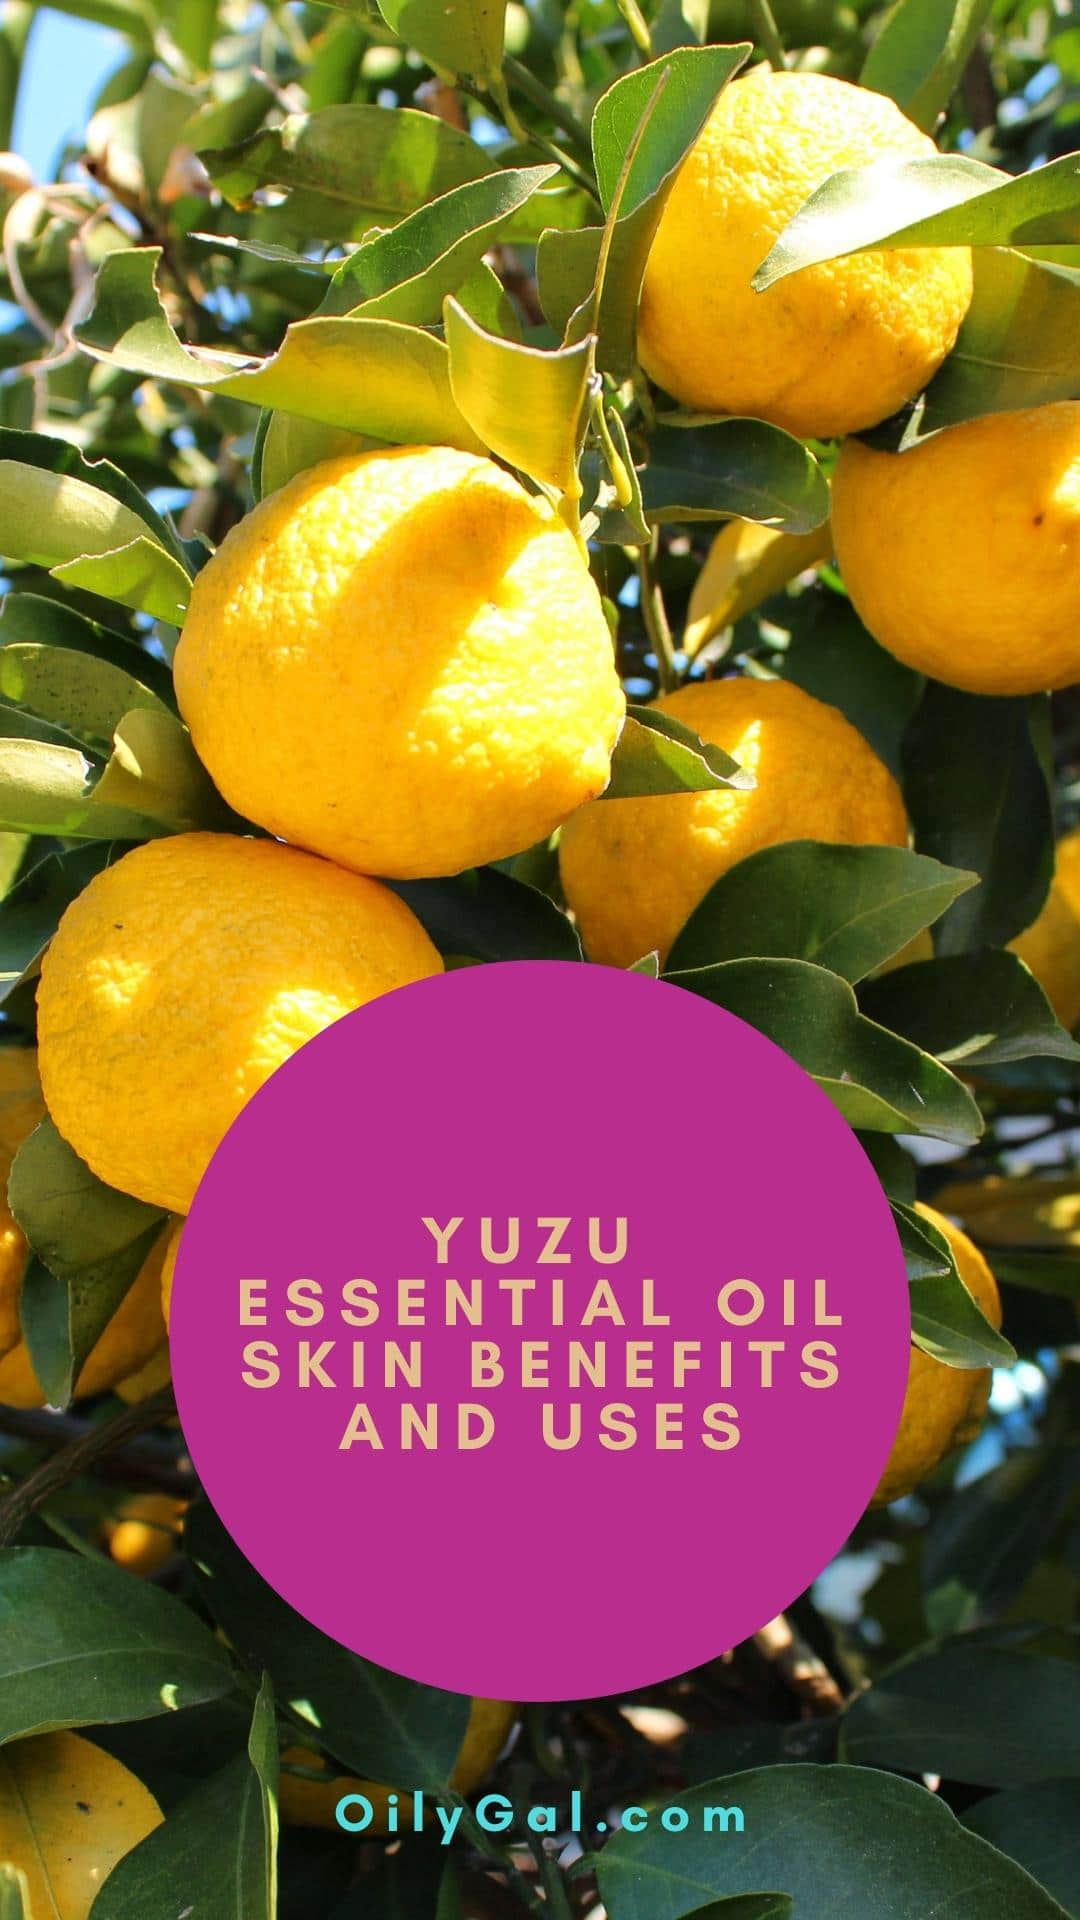 Yuzu Essential Oil Skin Benefits and Uses